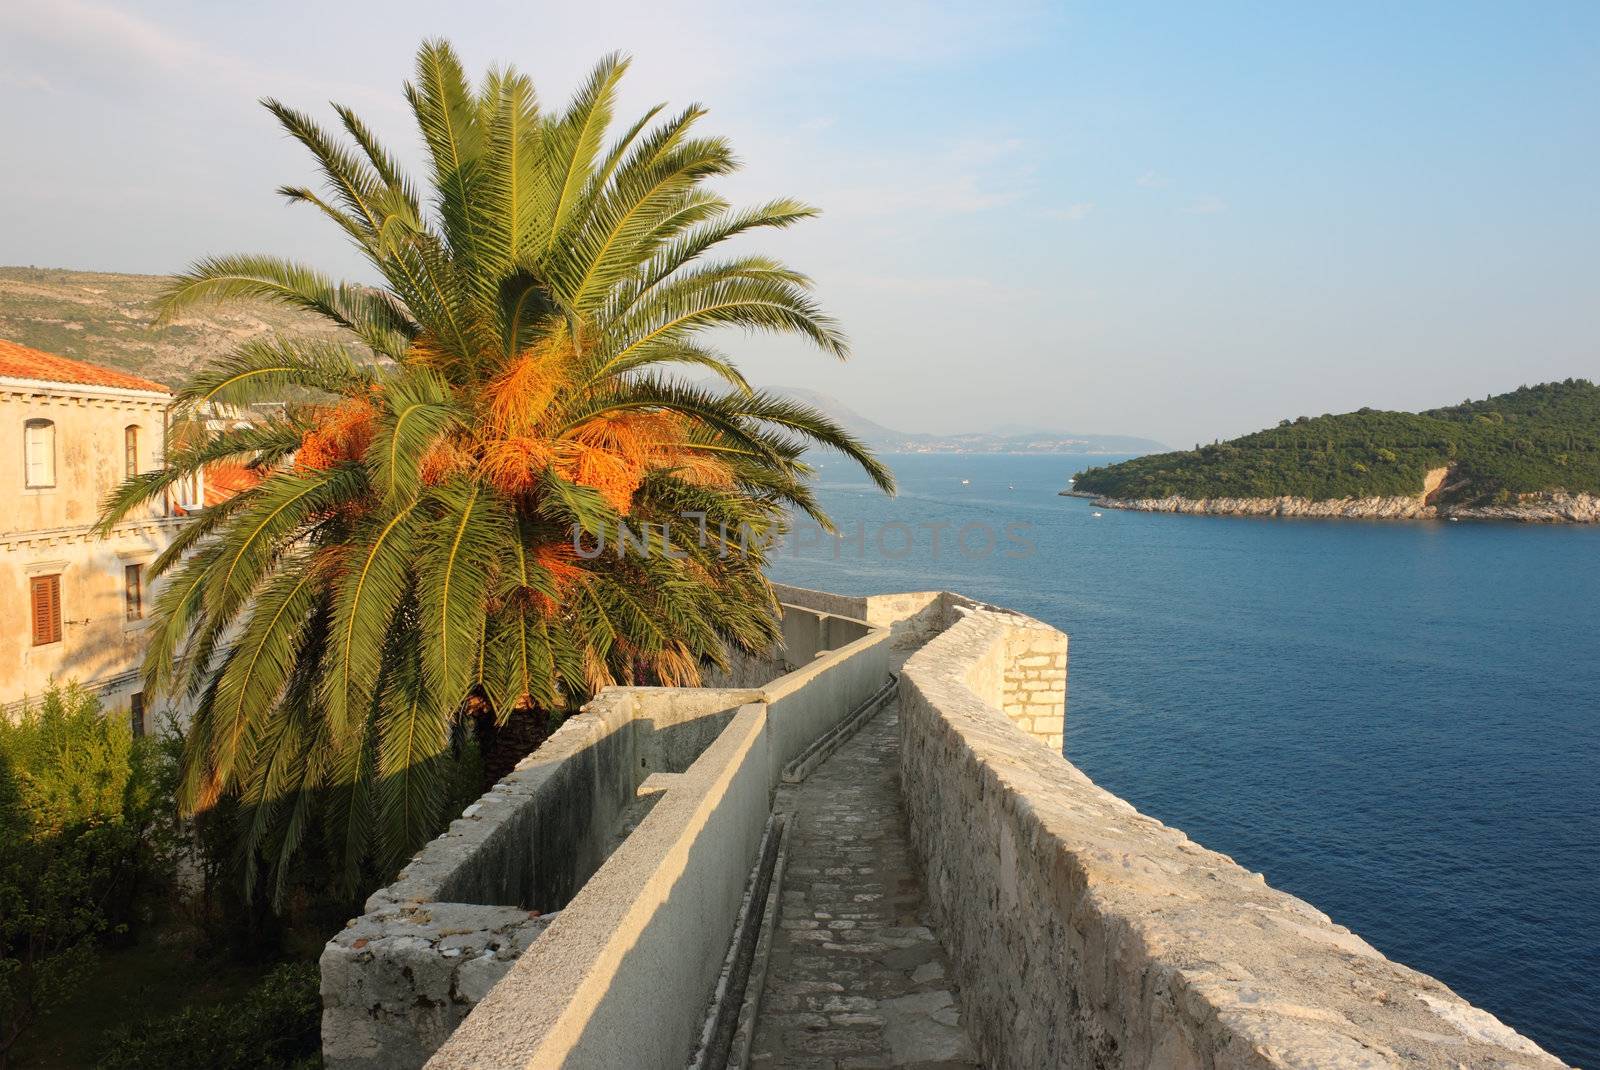 Walk around Dubrovnik Fortress wall, with a view toward island Lokrum in the warm light of the sunset.